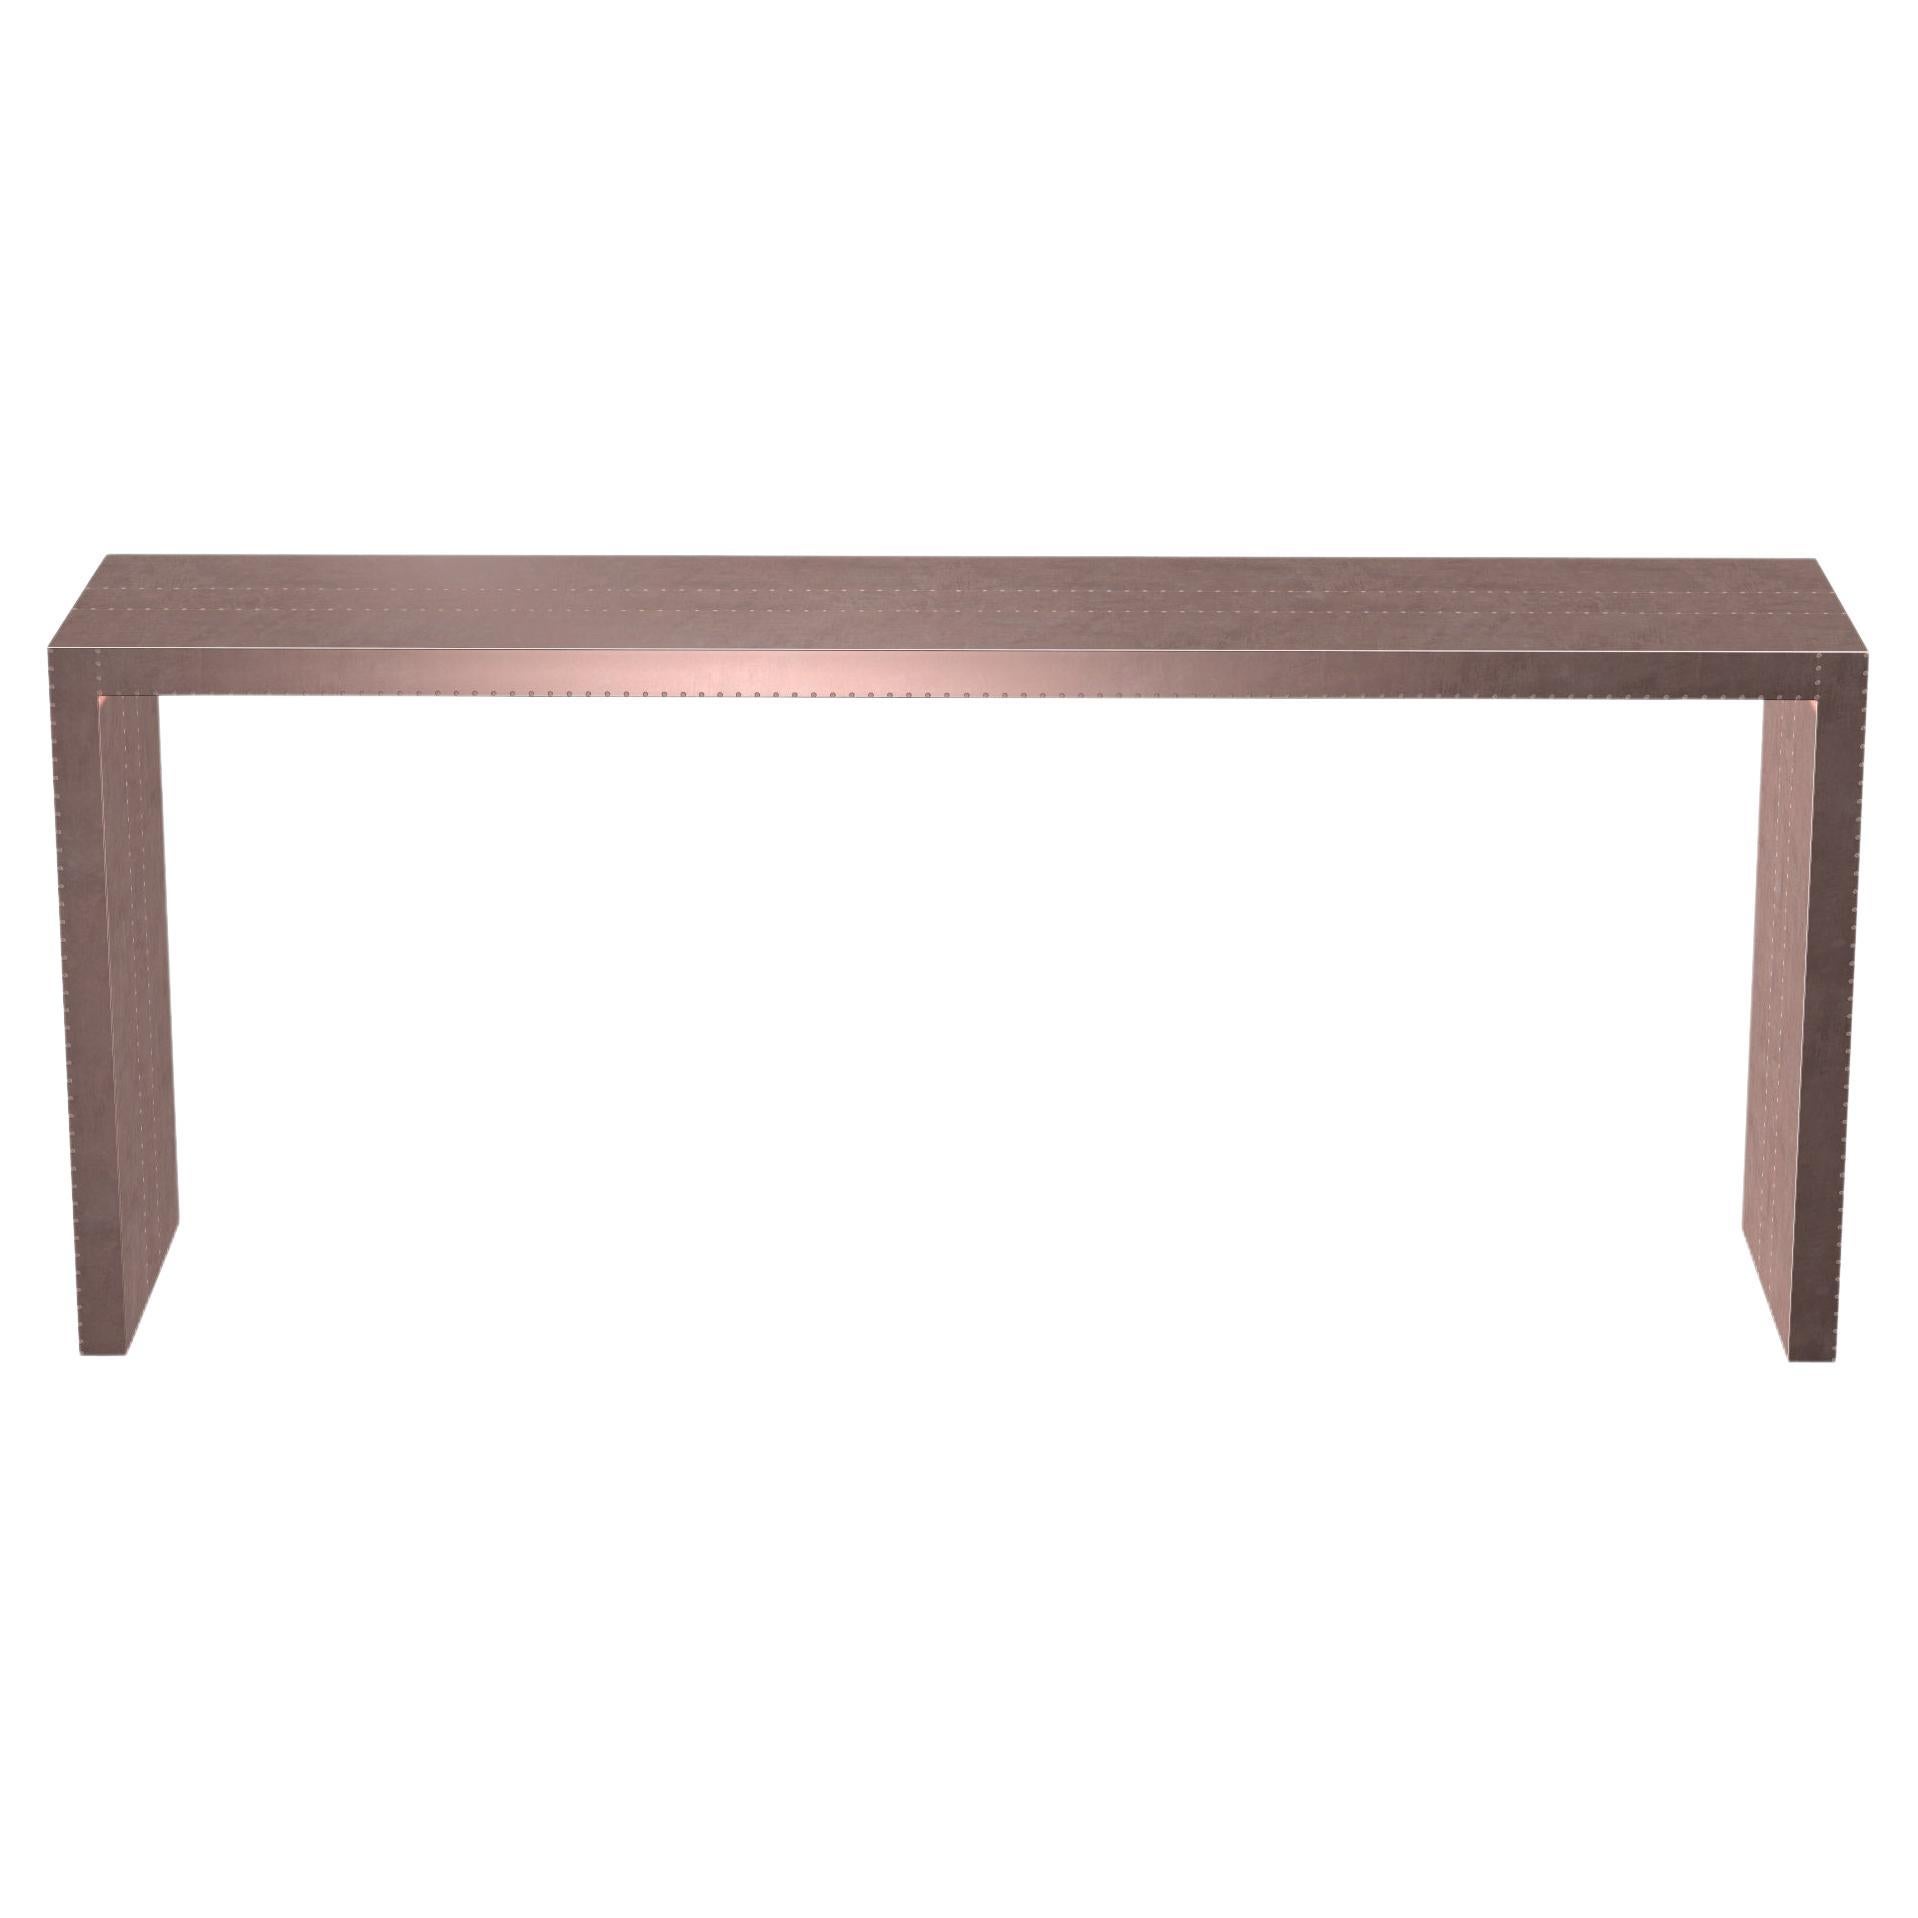 Art Nouveau Tray Tables Rectangular Console in Smooth Copper by Alison Spear For Sale